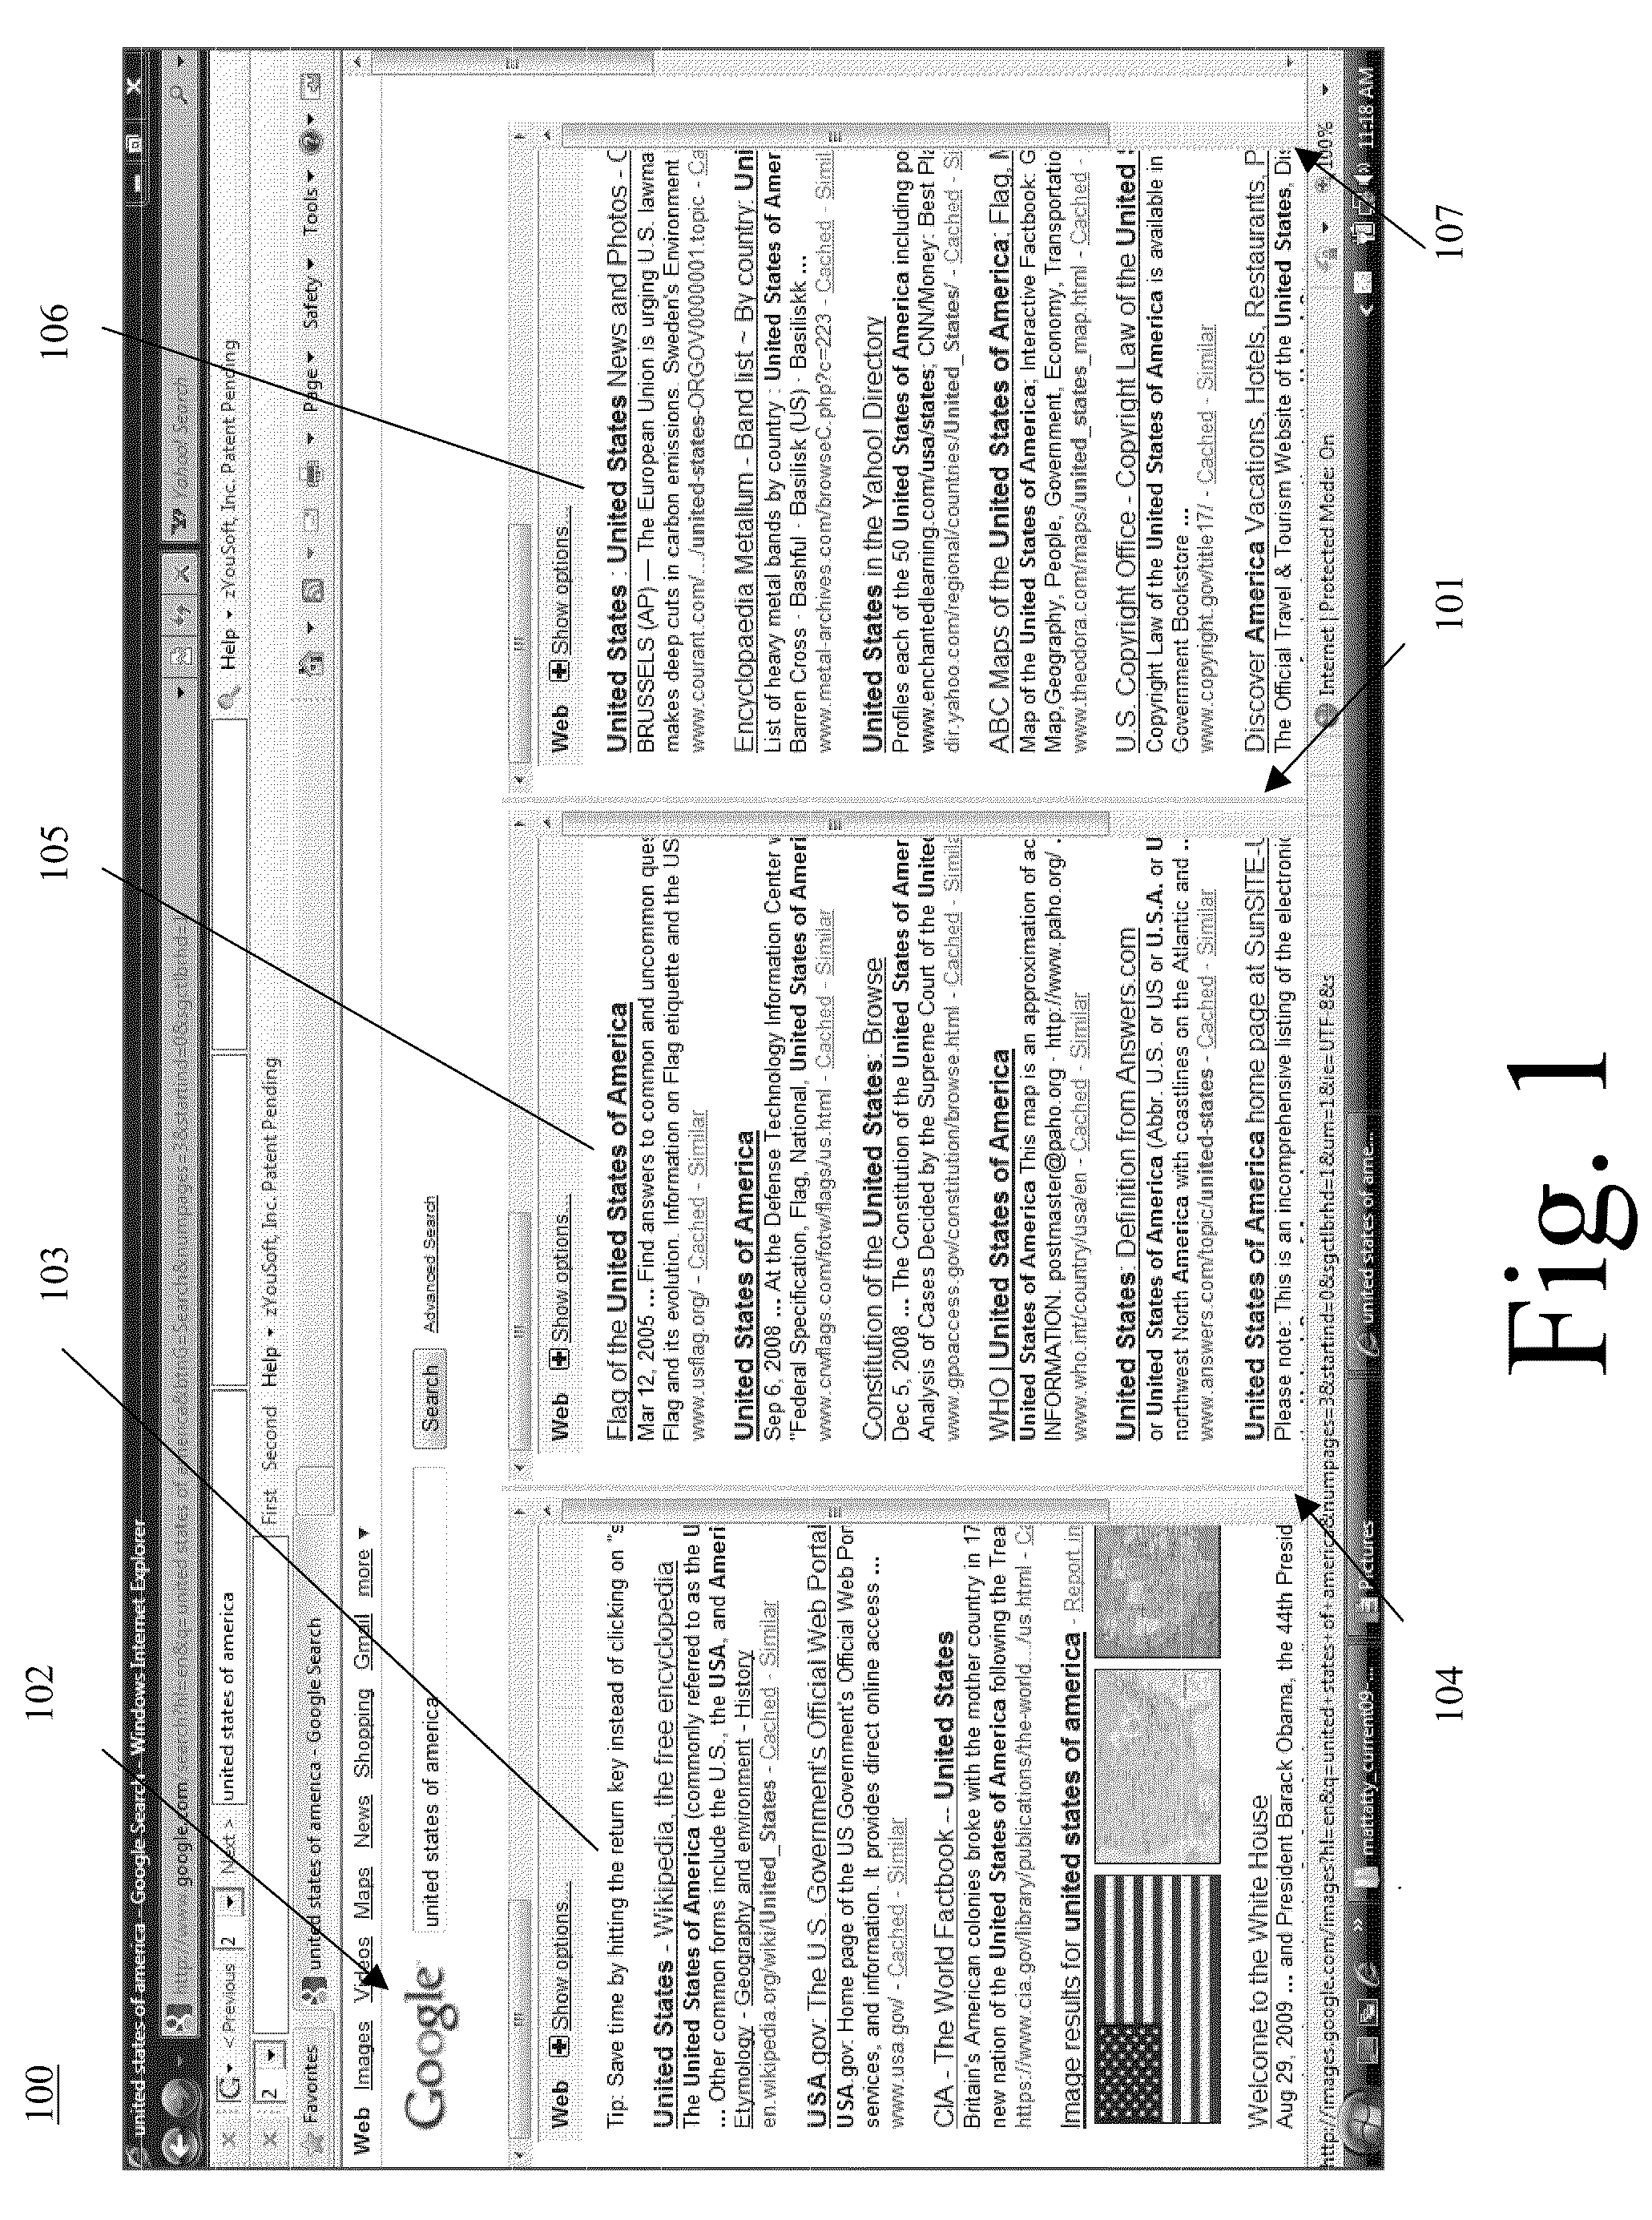 System and method of multi-page display and interaction of any internet search engine data on an internet browser